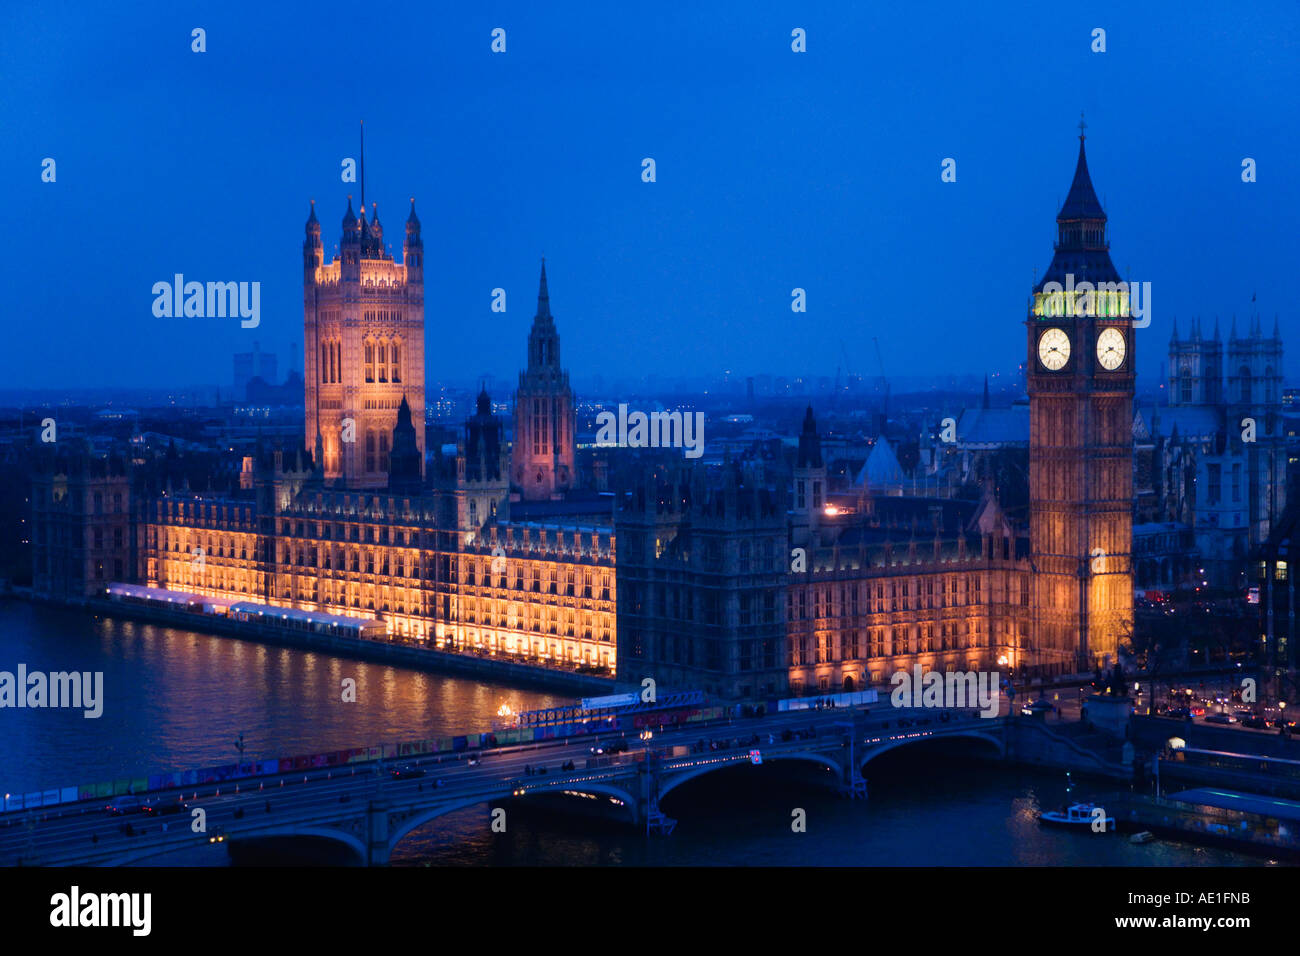 Houses of Parliament and Big Ben seen from the British Airways London Eye at night Stock Photo